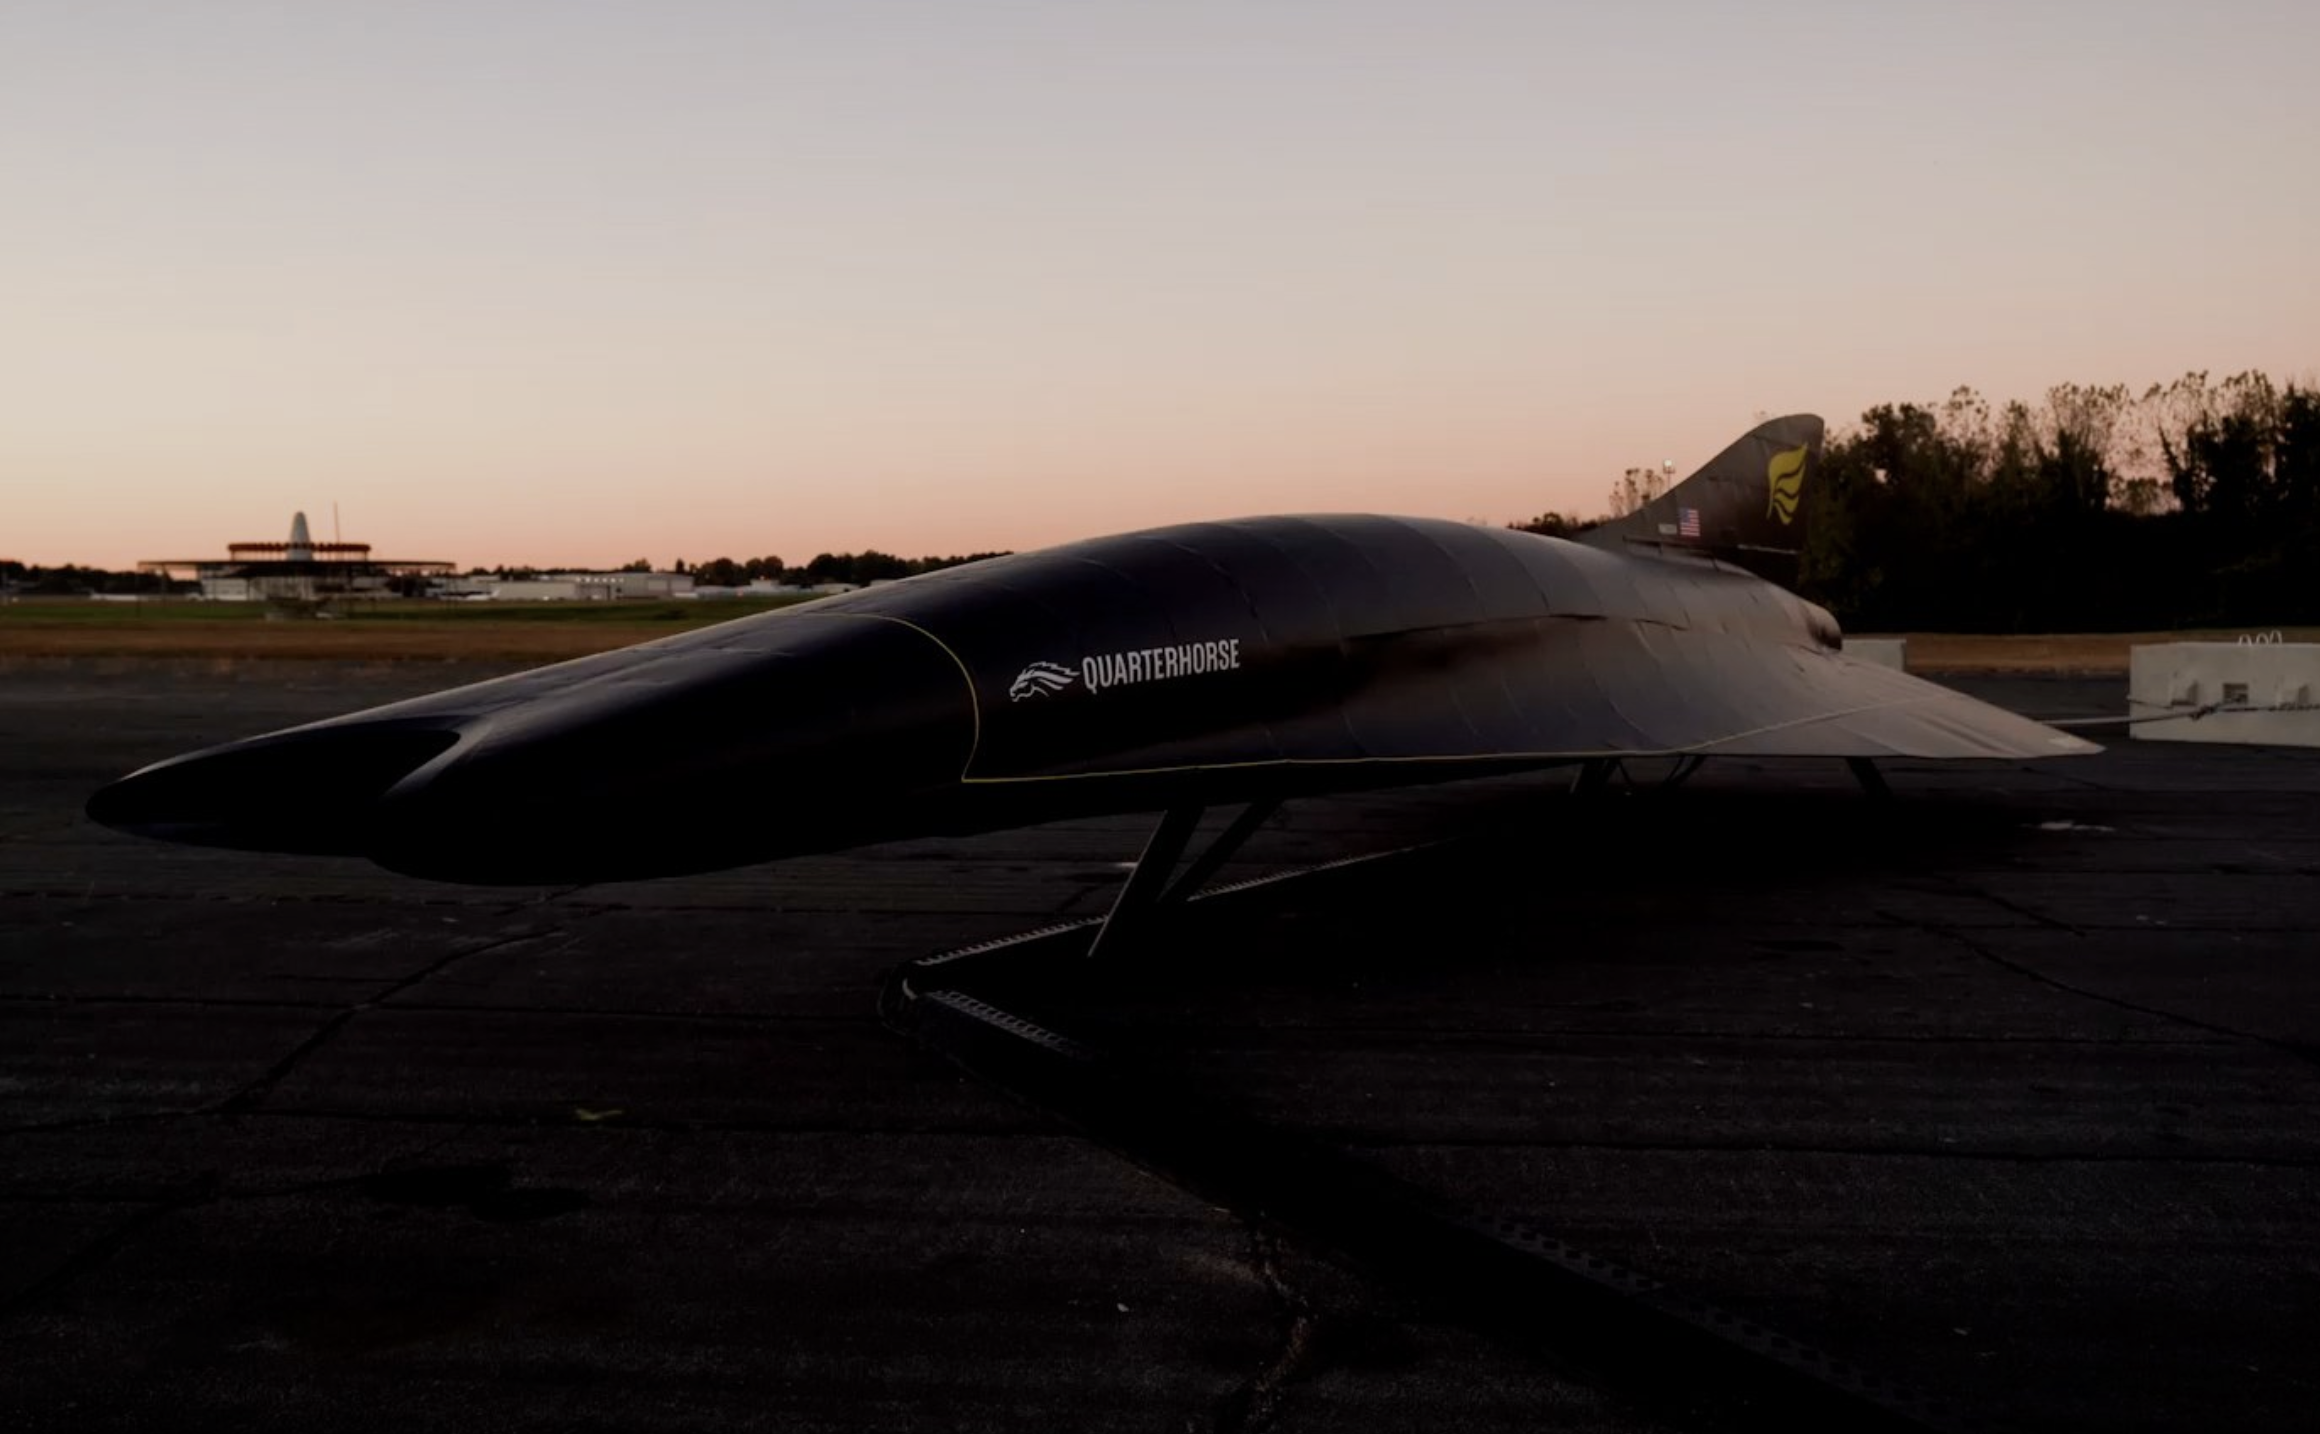 Hermeus to Build World's Fastest Aircraft with Newly Acquired Velo3D Sapphire Printers